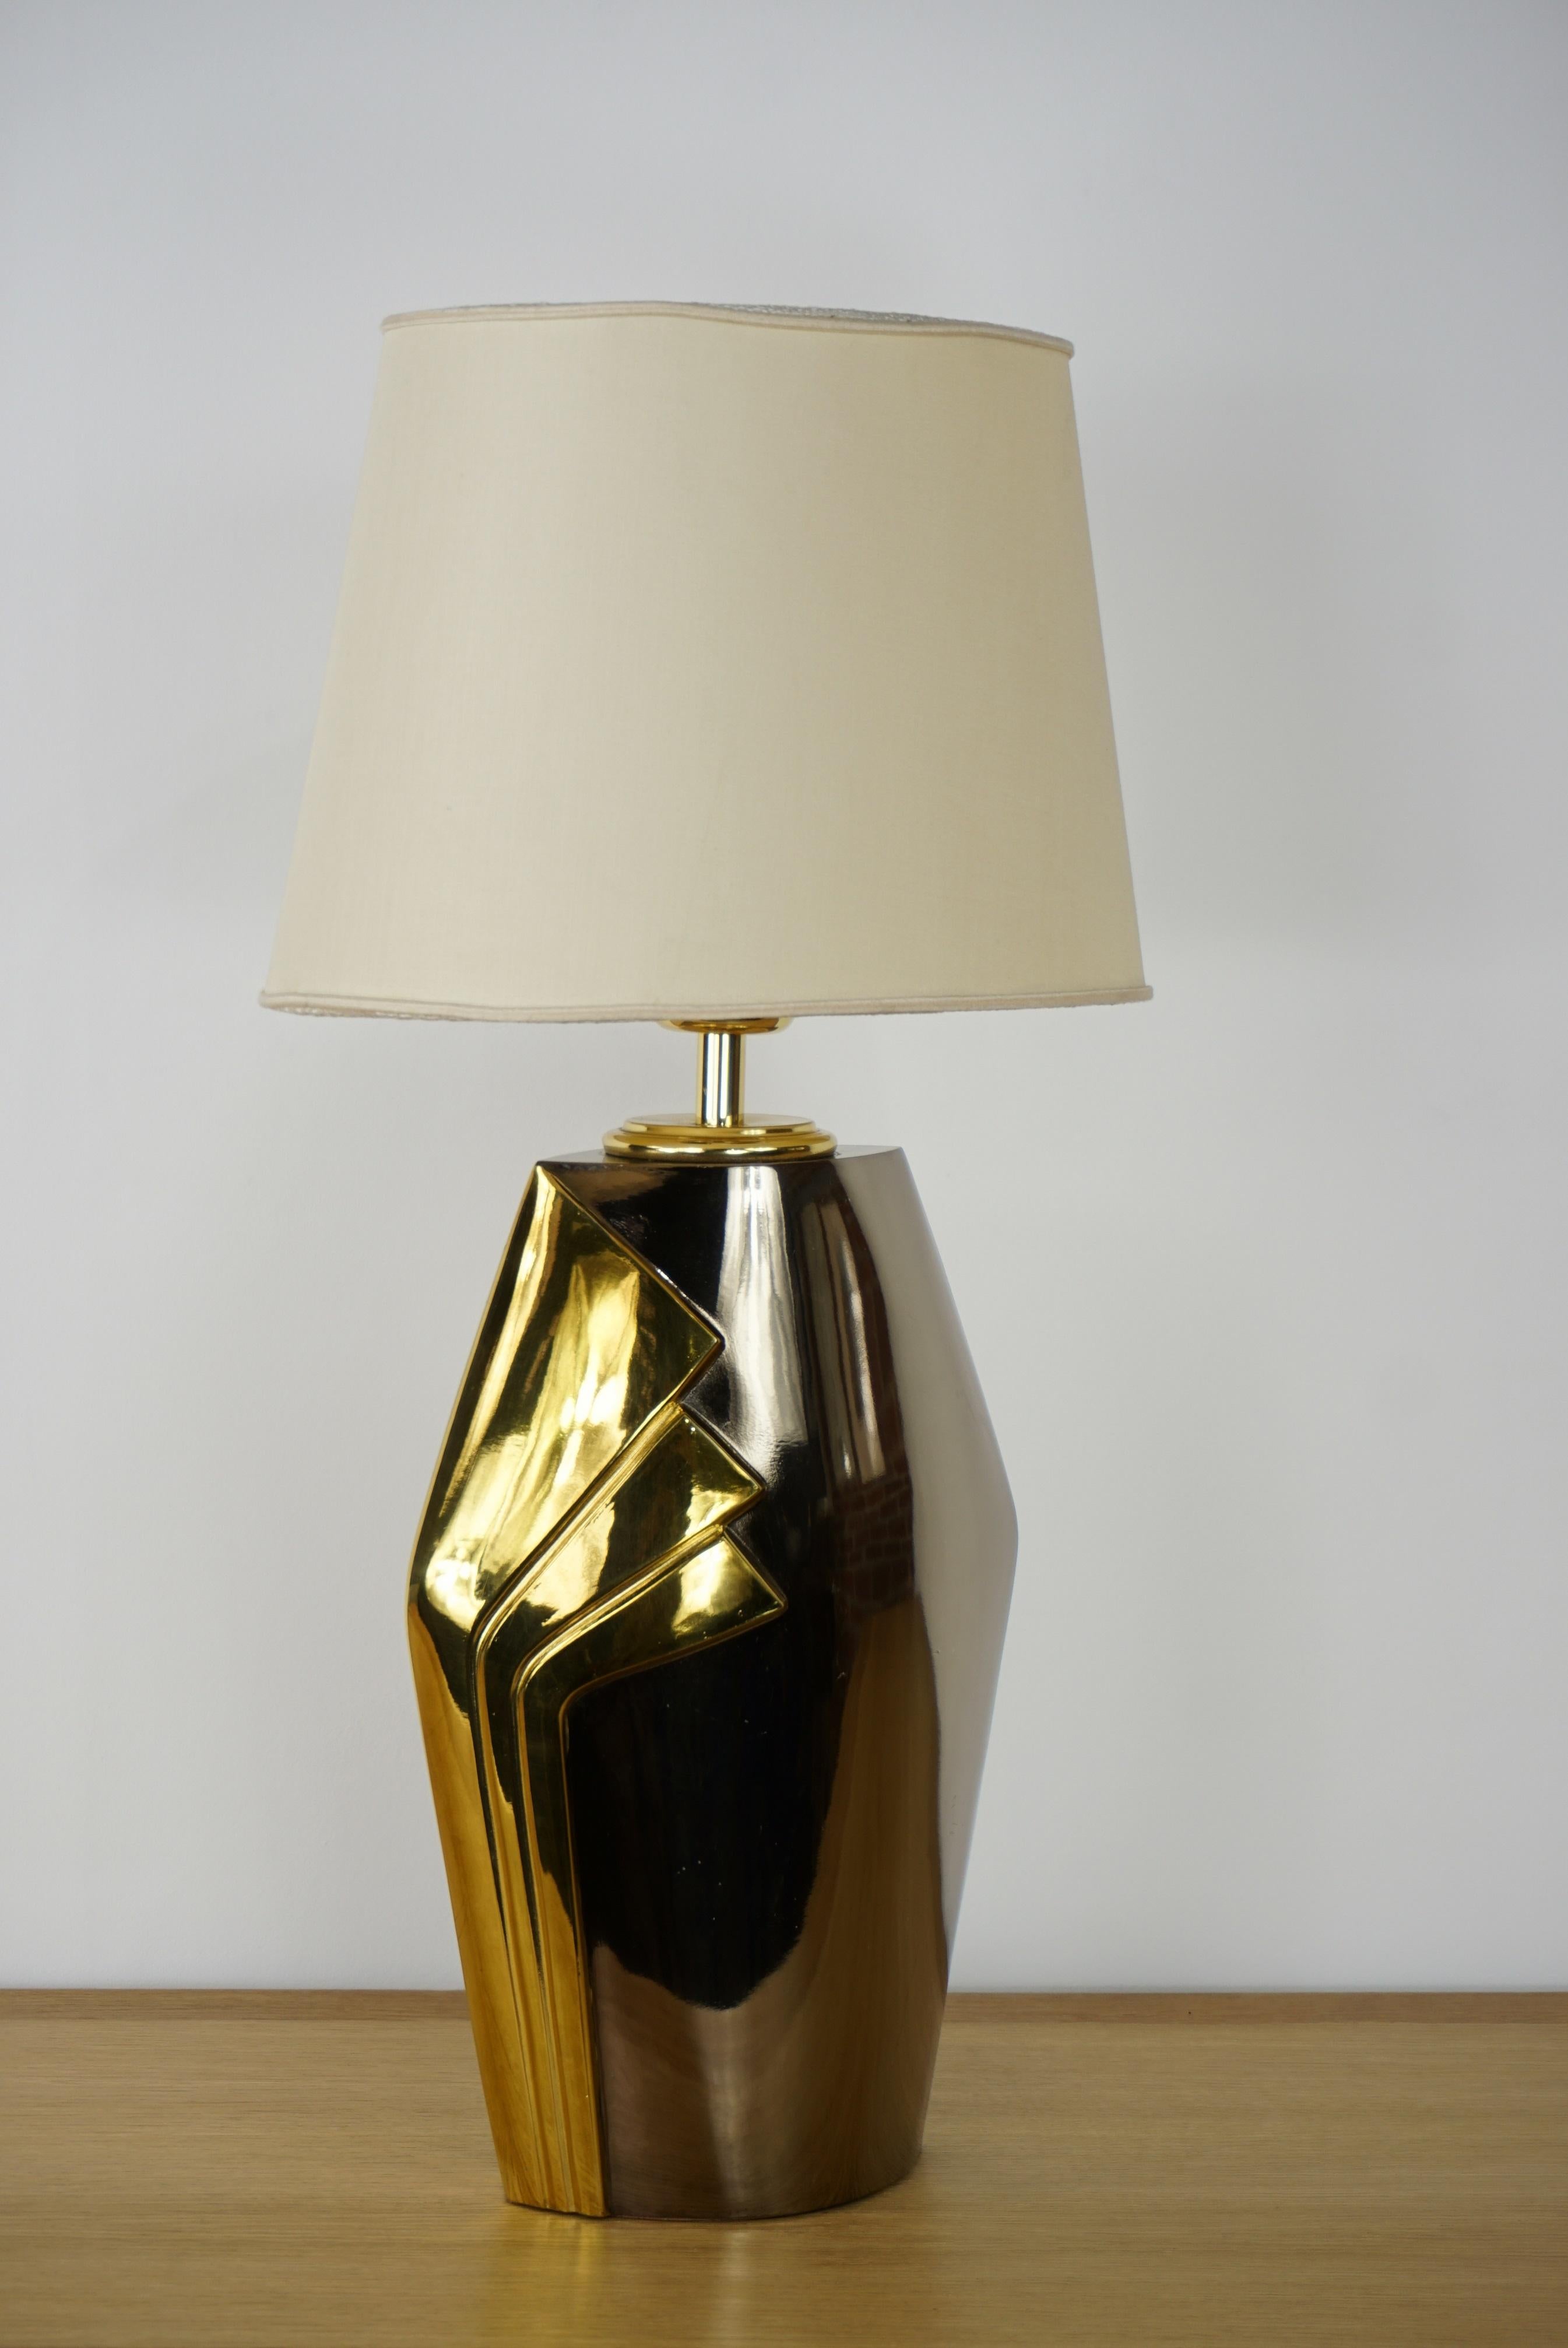 Design metal and brass lamp with harmonious and precious lines. Prestigious and elegant